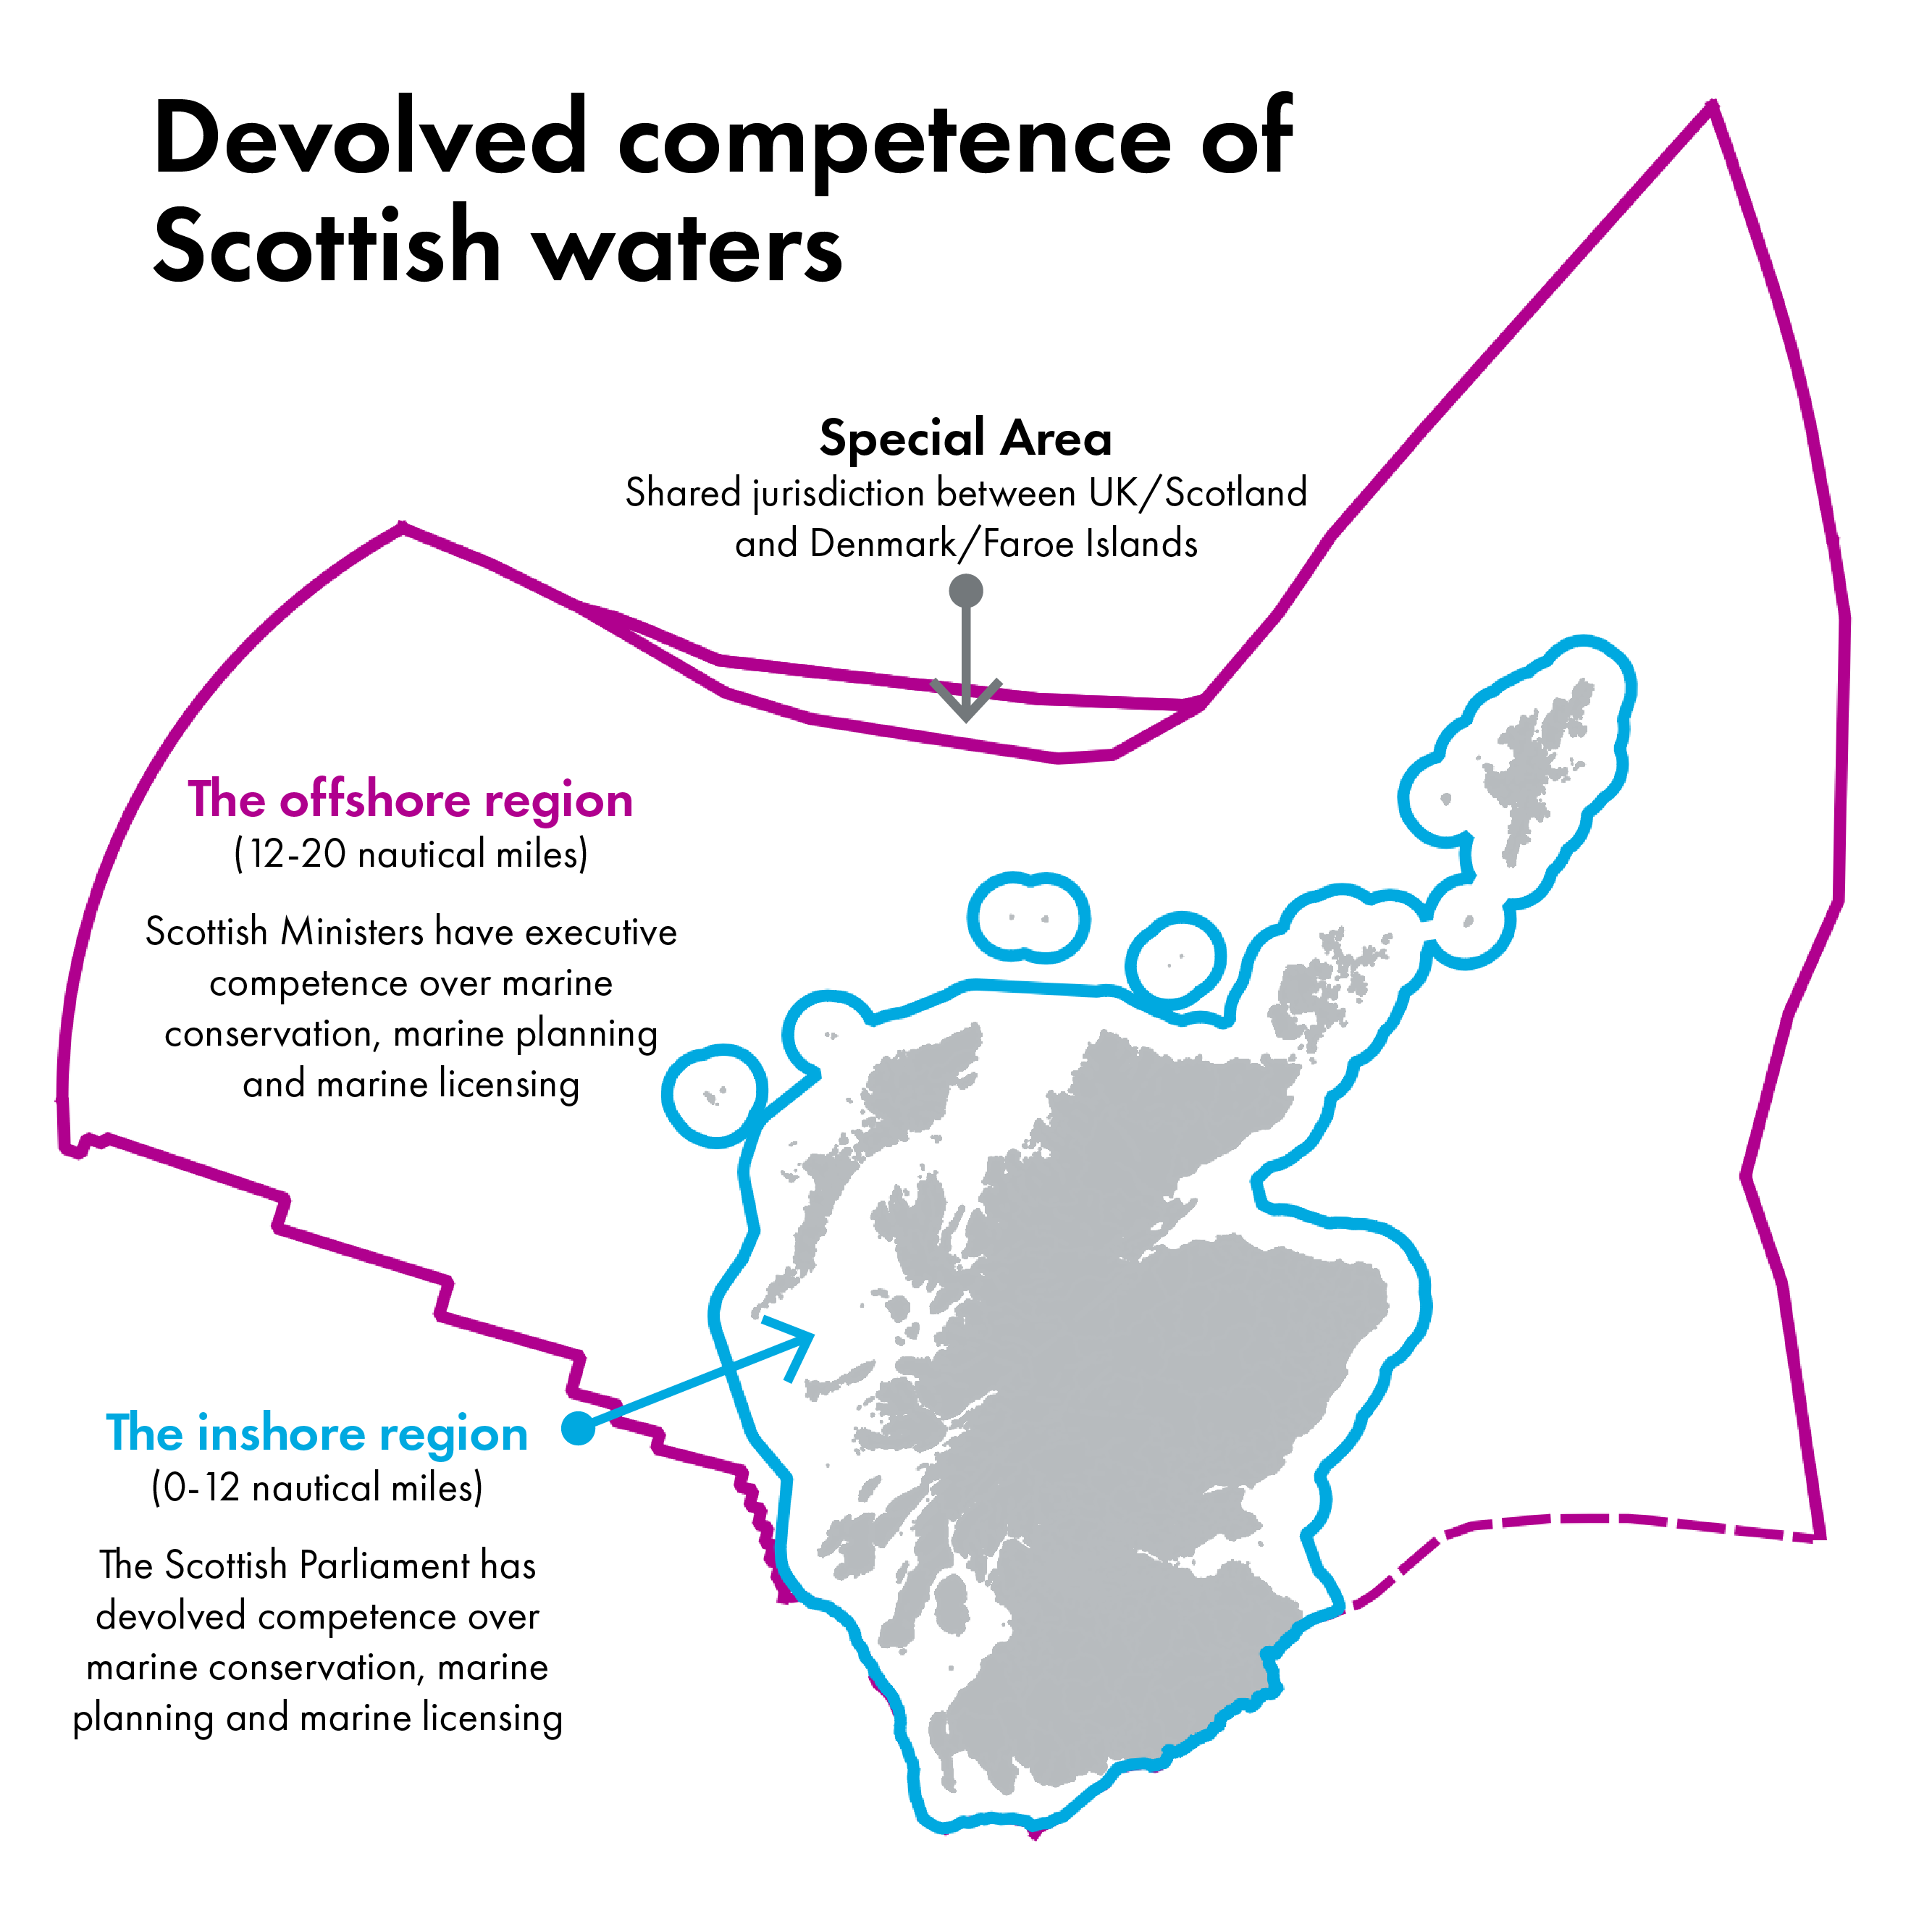 Map showing devolved competence in Scottish waters. The map specifies the existence of a 'special area' of shared jurisdiction between the UK/Scotland and Denmark/Faroe Islands. The location of this area is to the north of mainland Scotland and west of Shetland.